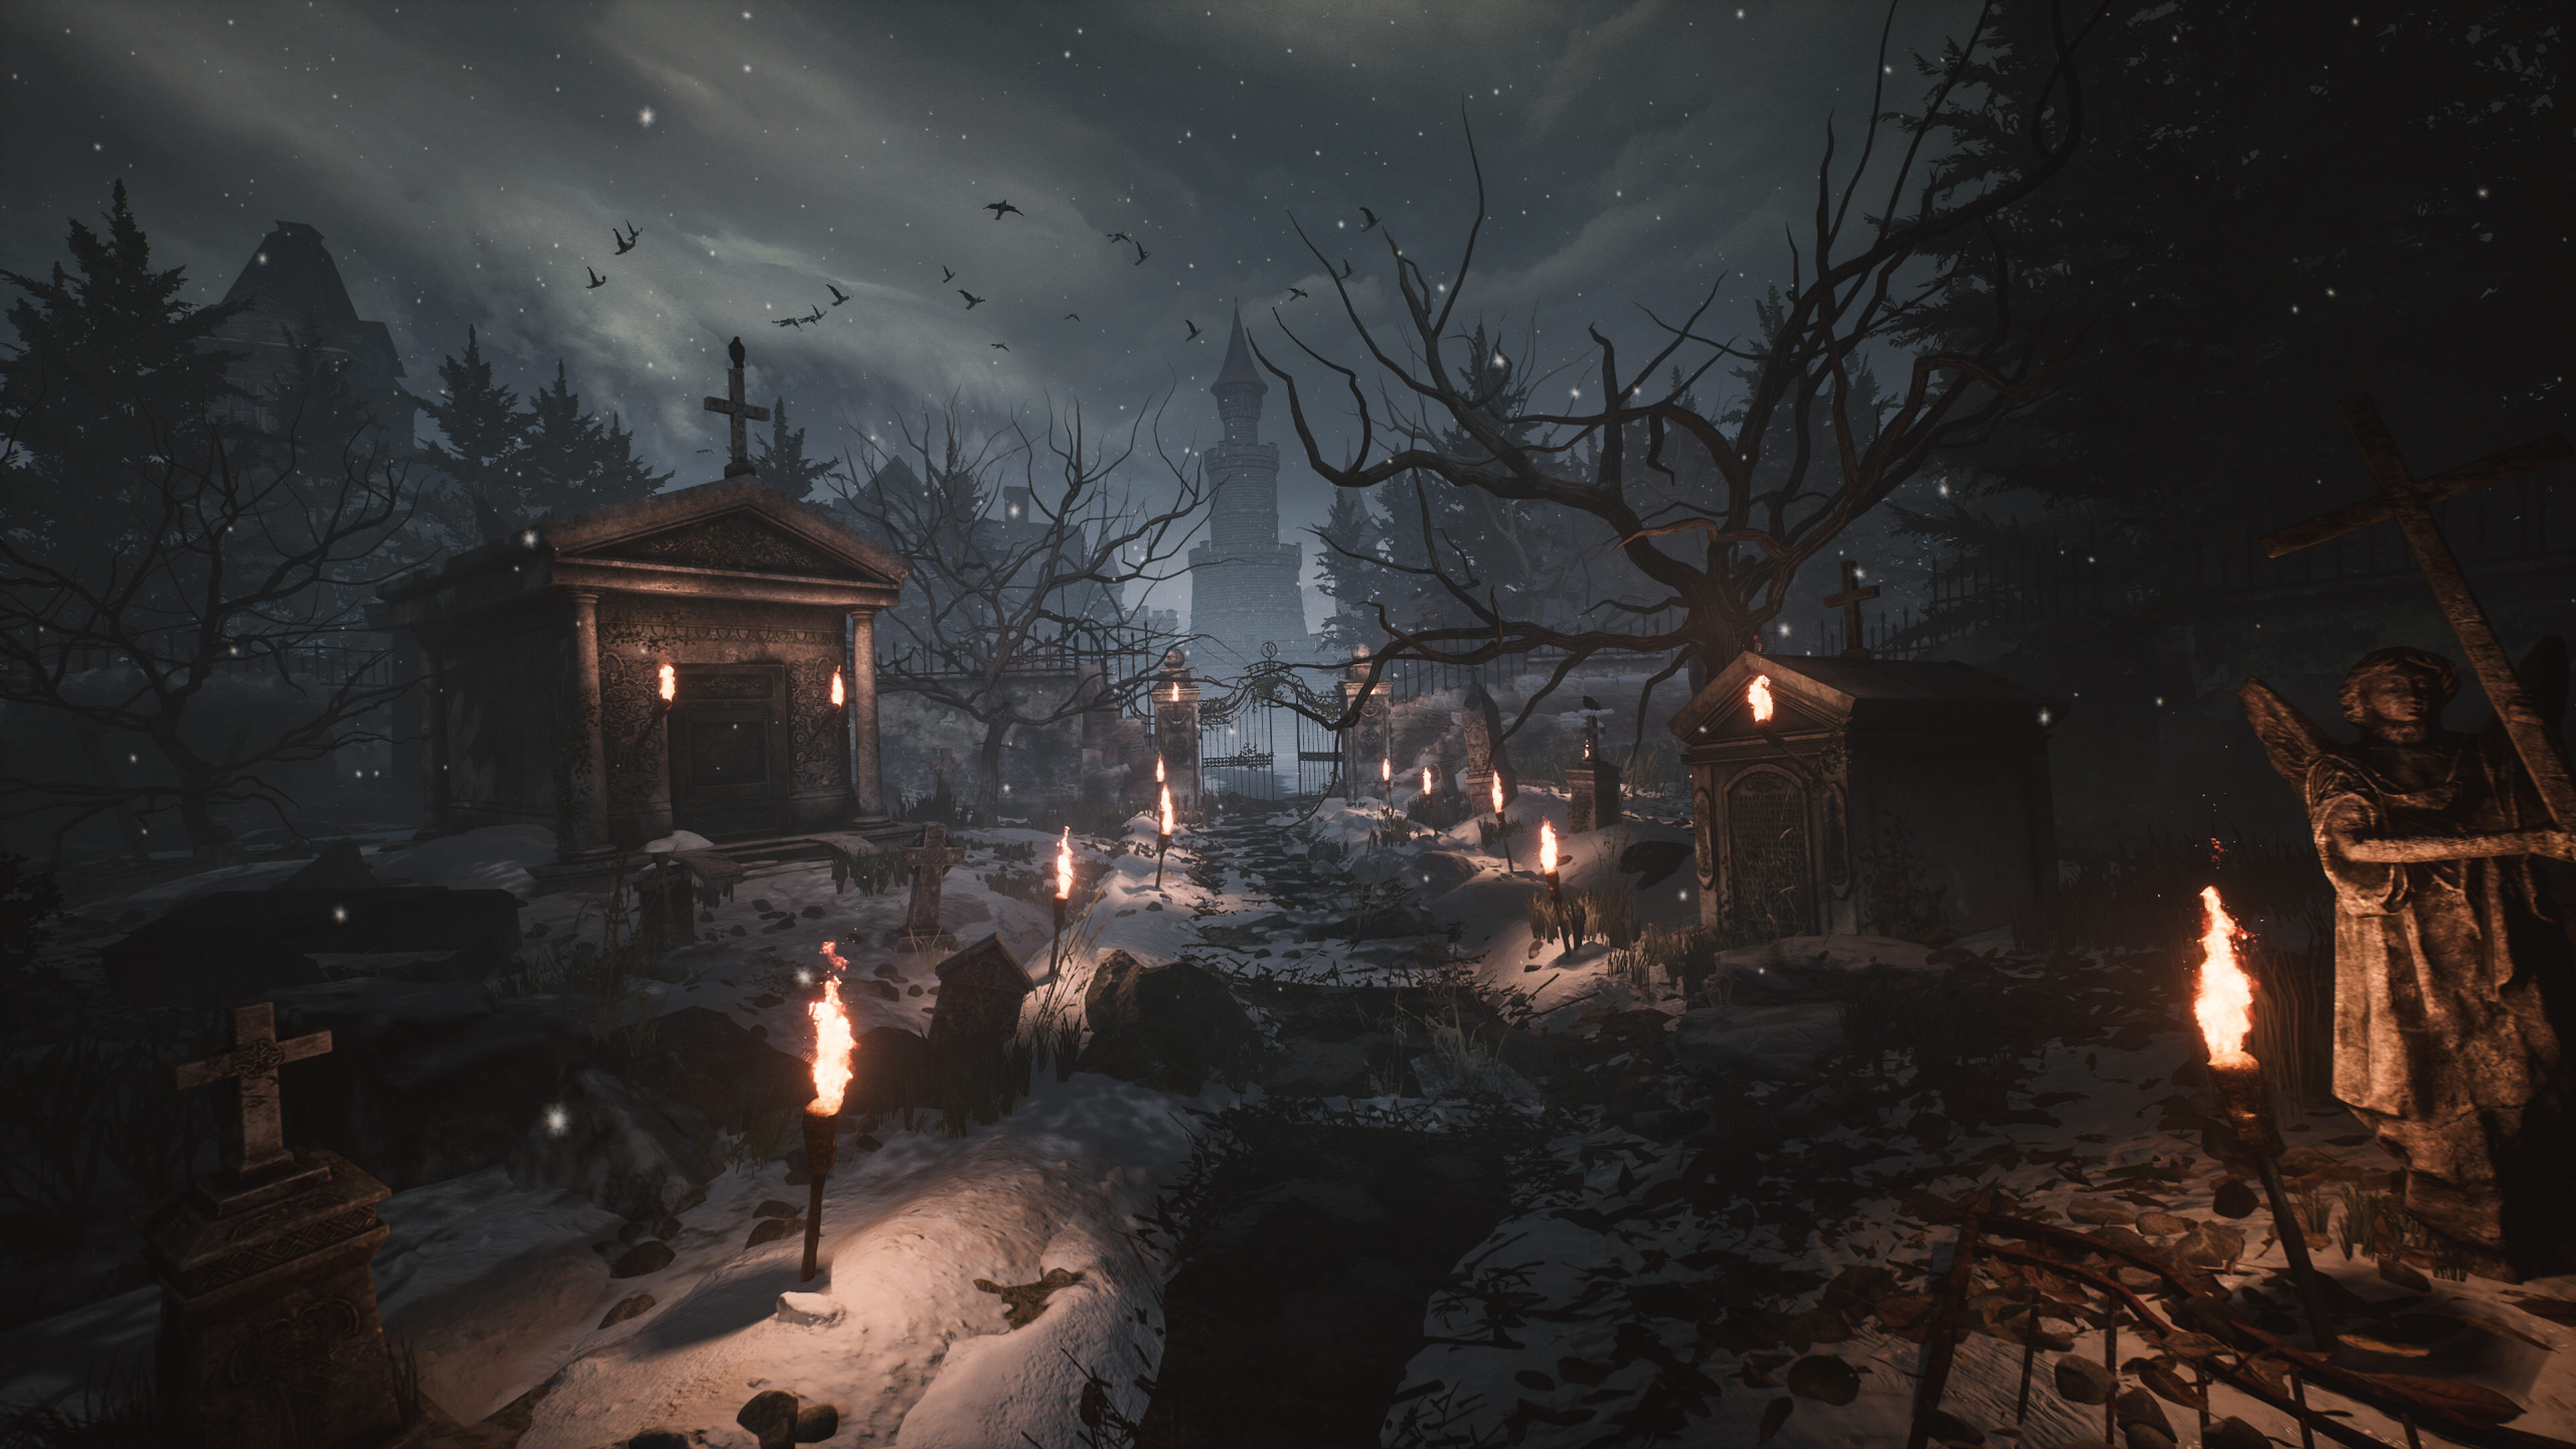 Created with Unreal Engine 4.26 inspired by Resident Evil 8 Village 